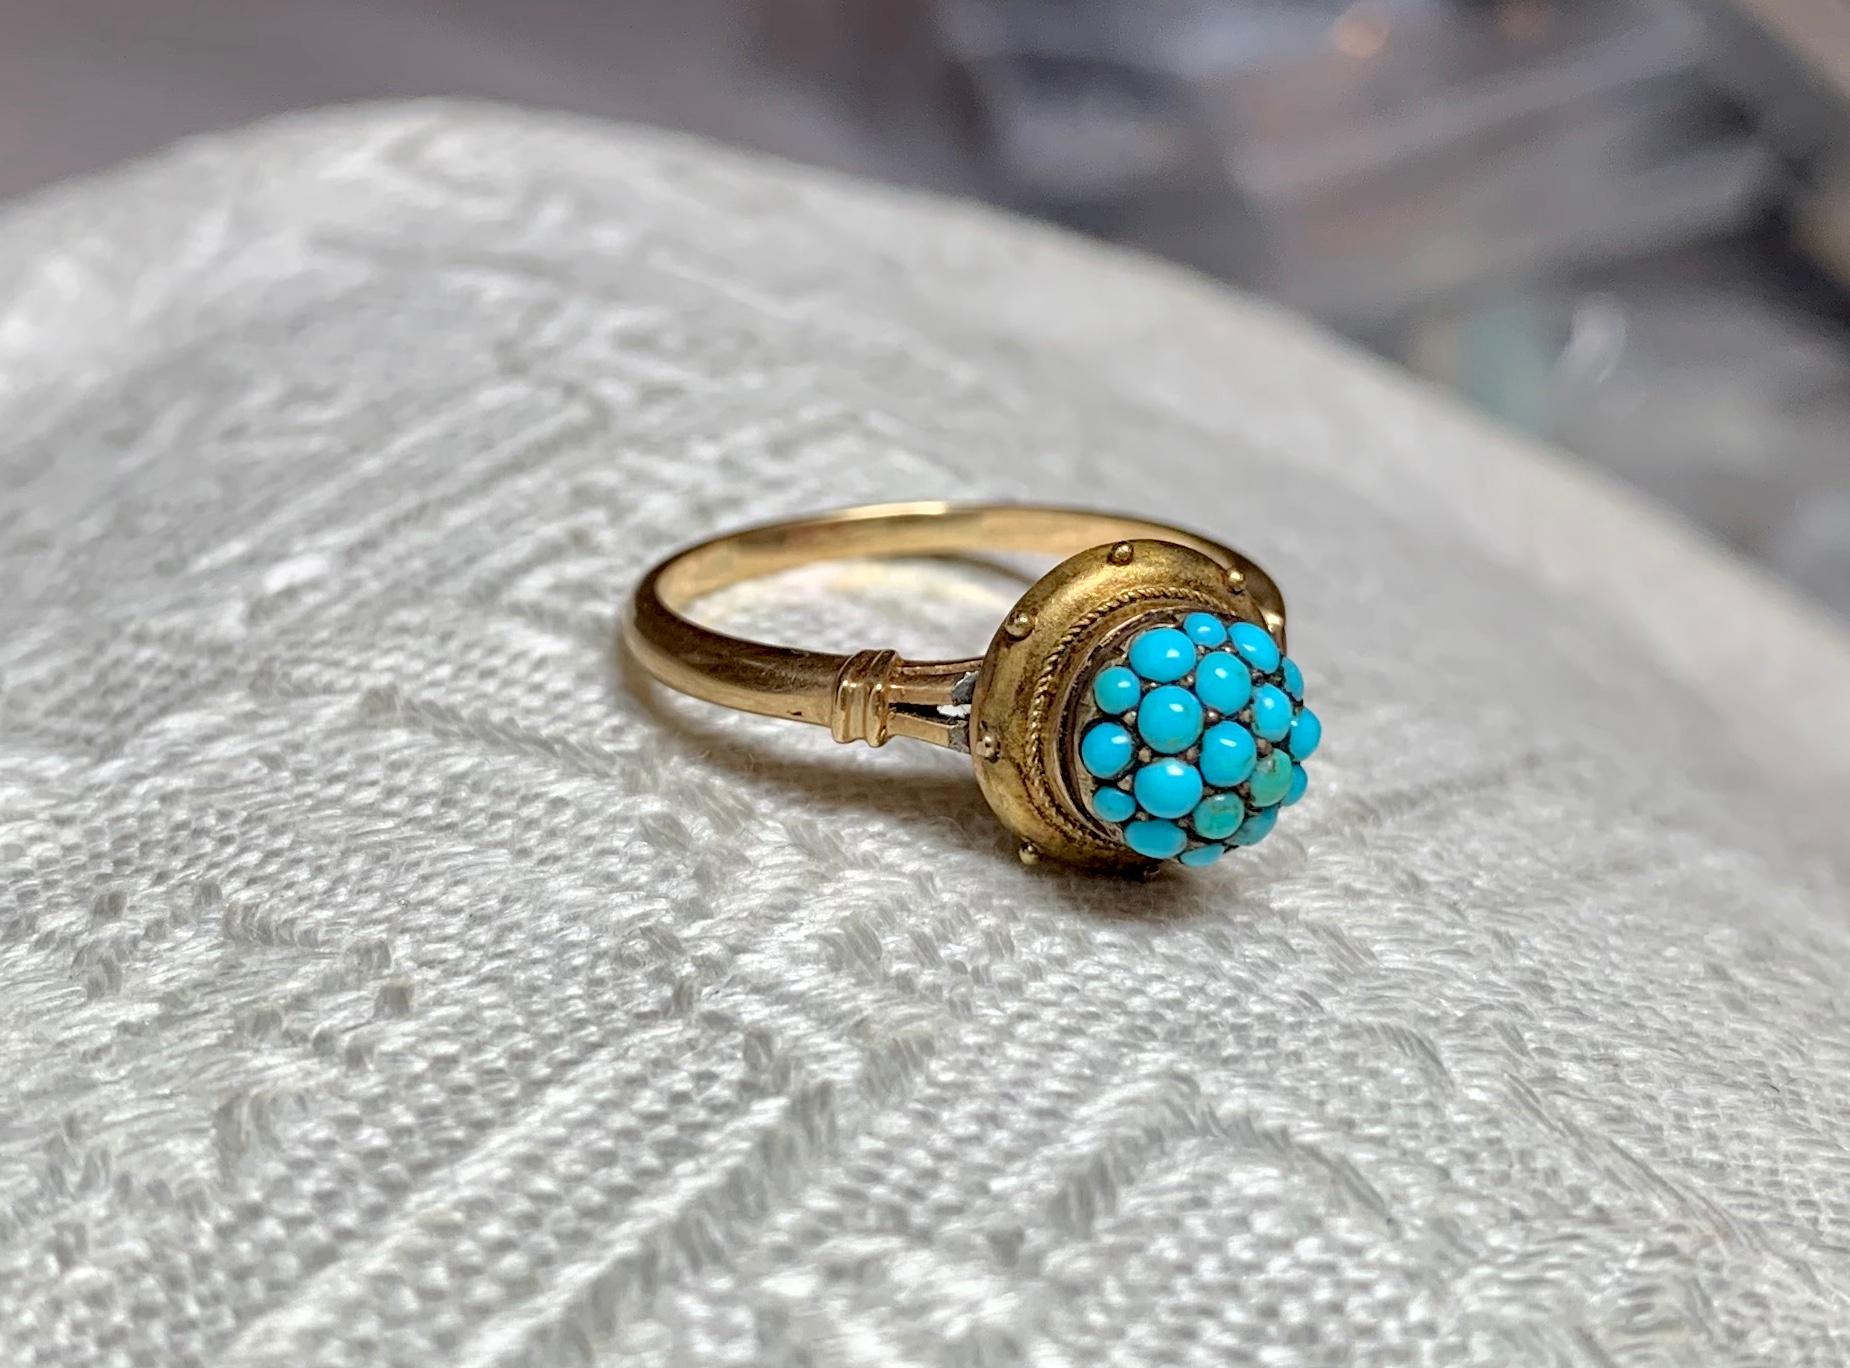 antique persian turquoise jewelry